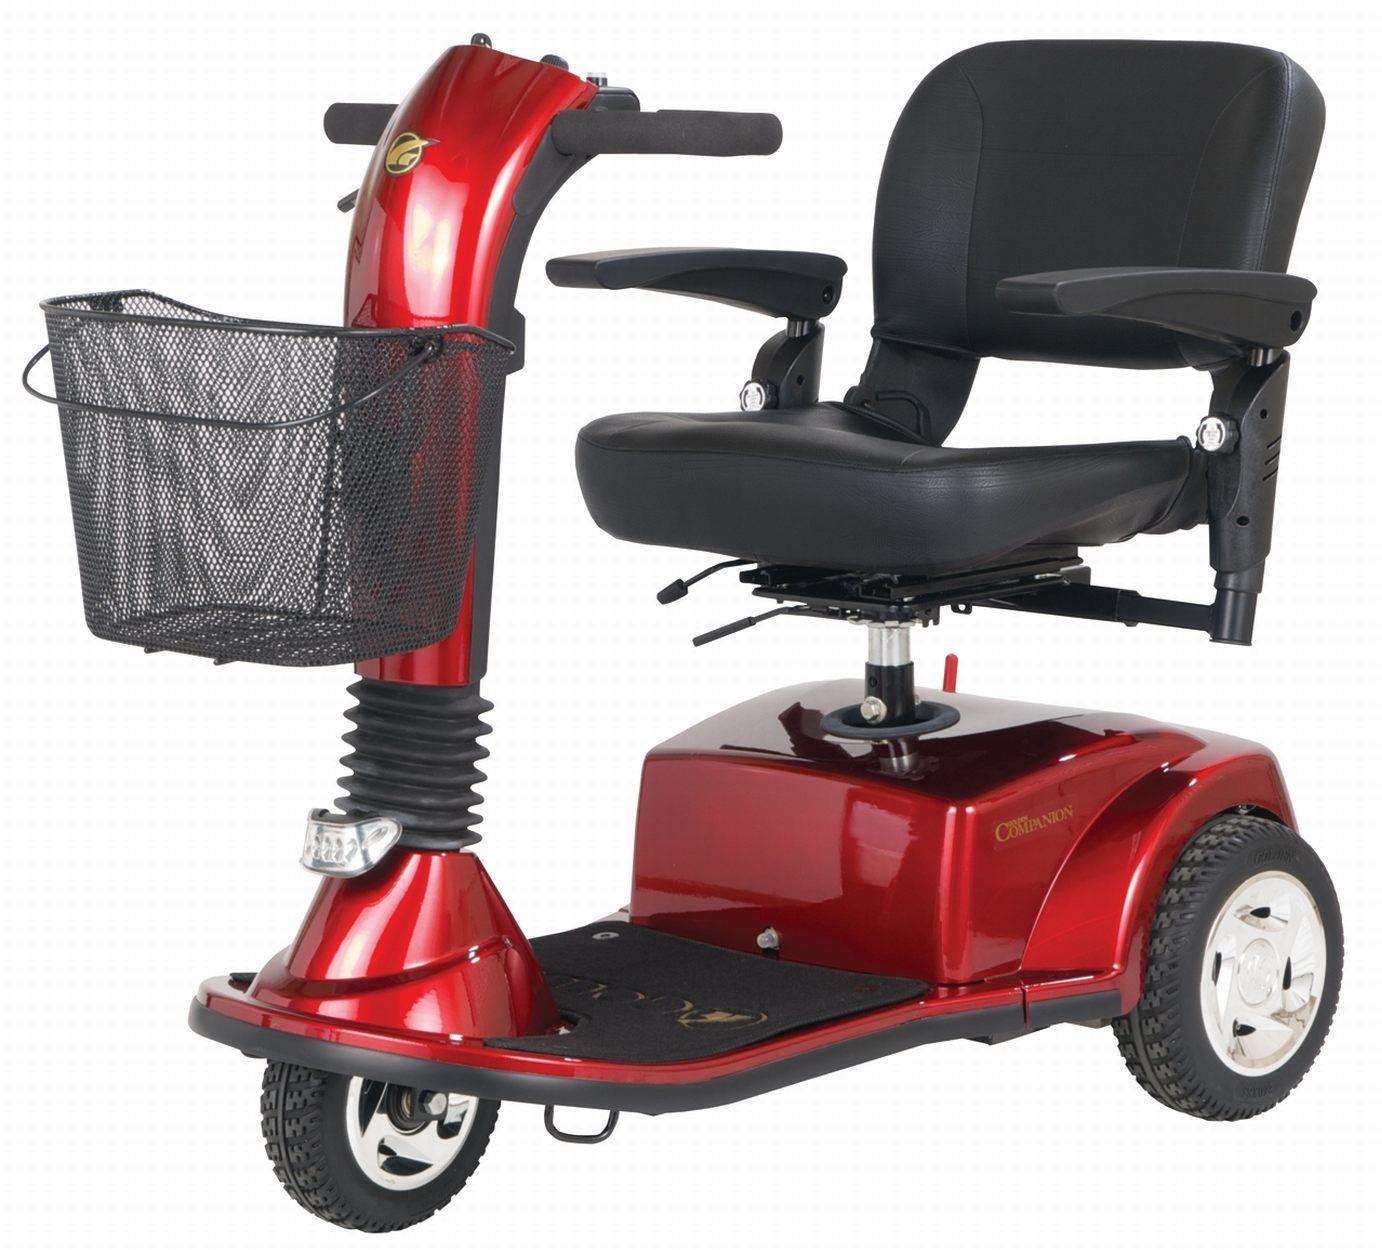 Red mobility scooter. Picture: Zdlpwebb Creative Commons Wikimedia (6722718)